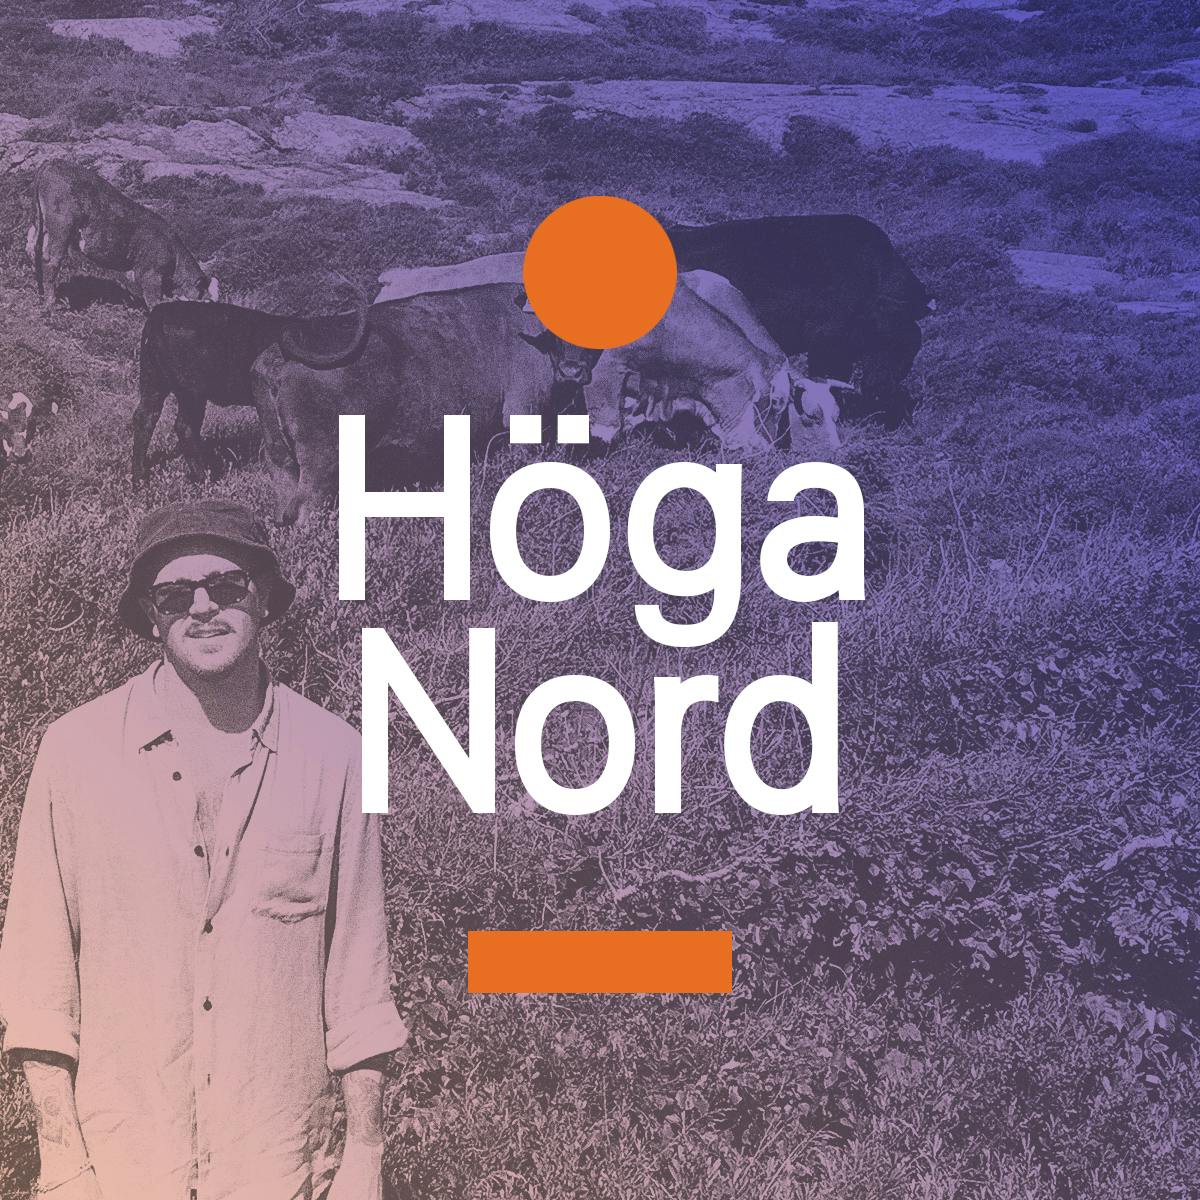 Curated By Höga Nord